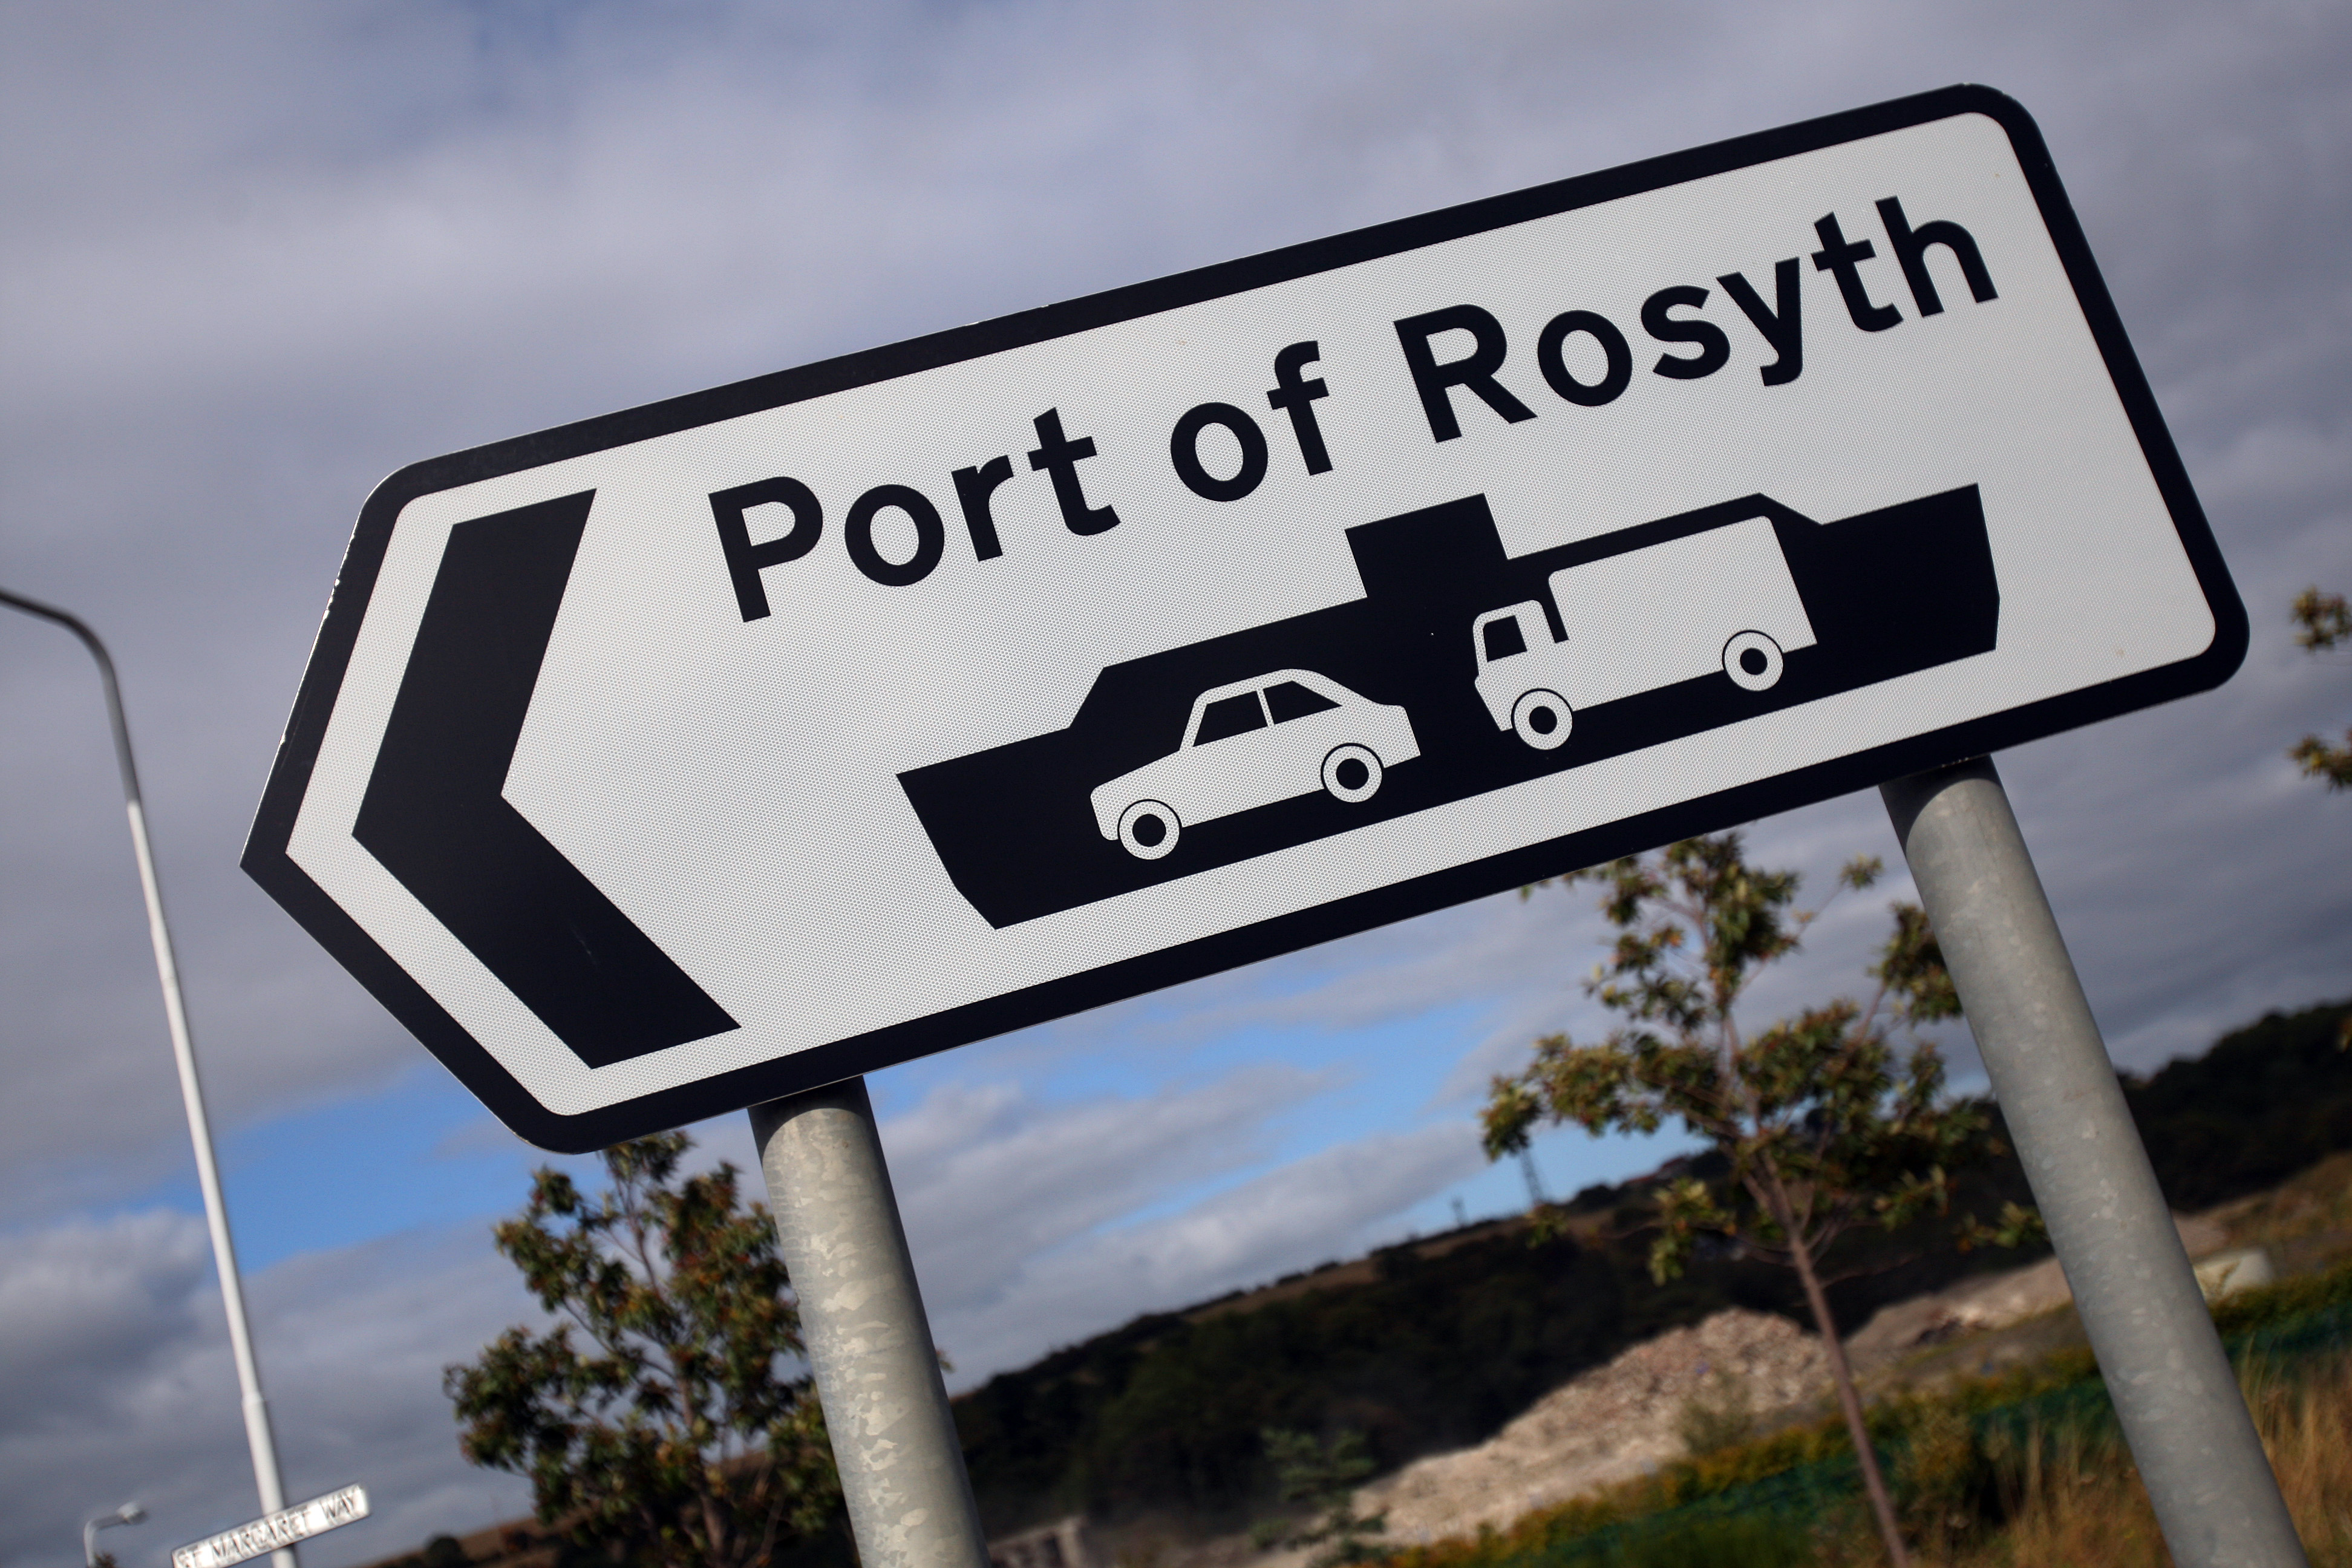 Rosyth in Fife cuold benefit from freeport status. Image: Kris Miller/DC Thomson